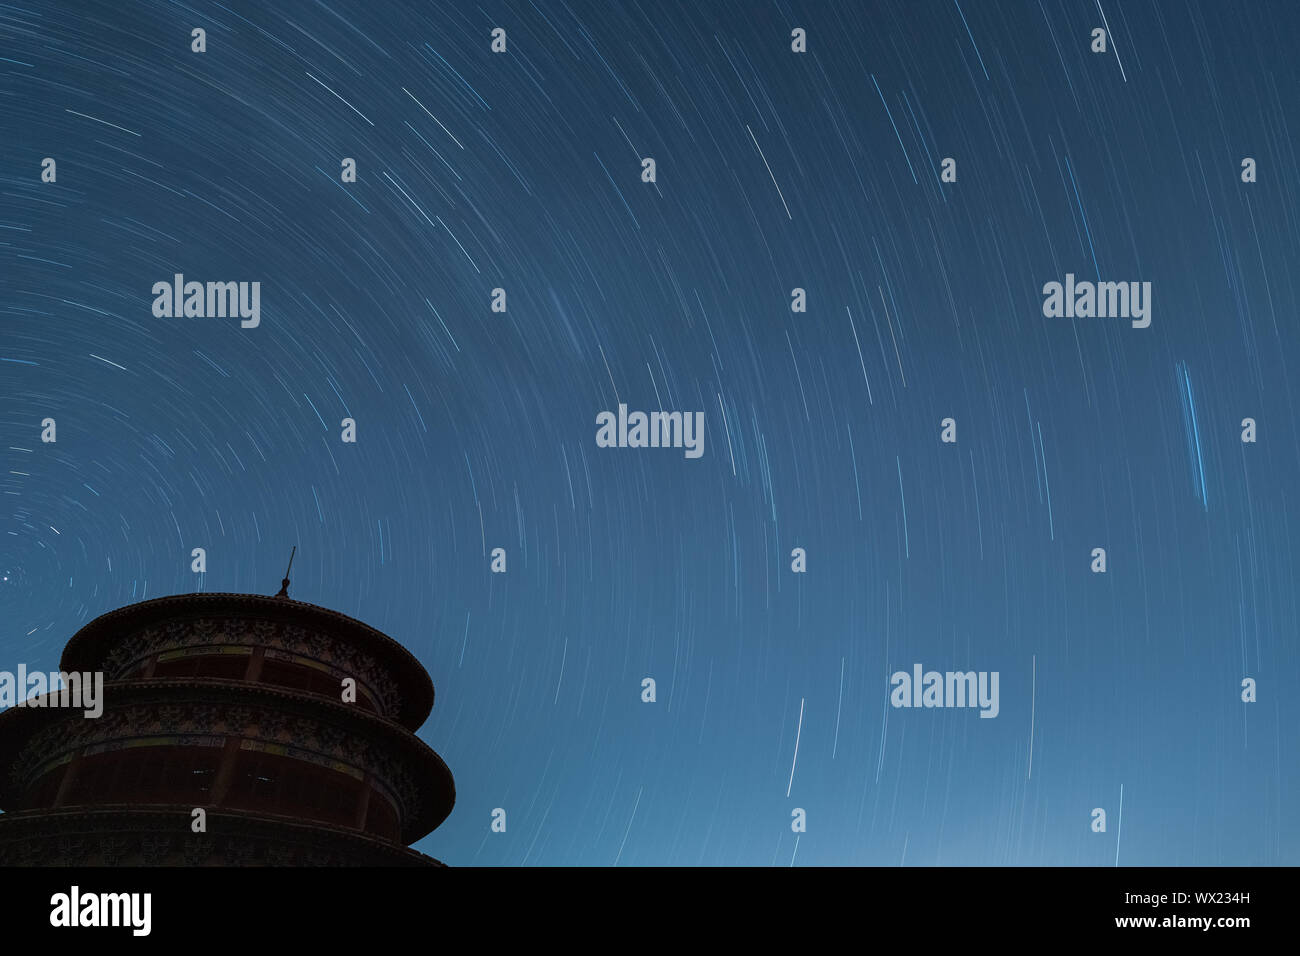 star trails of long time exposure Stock Photo